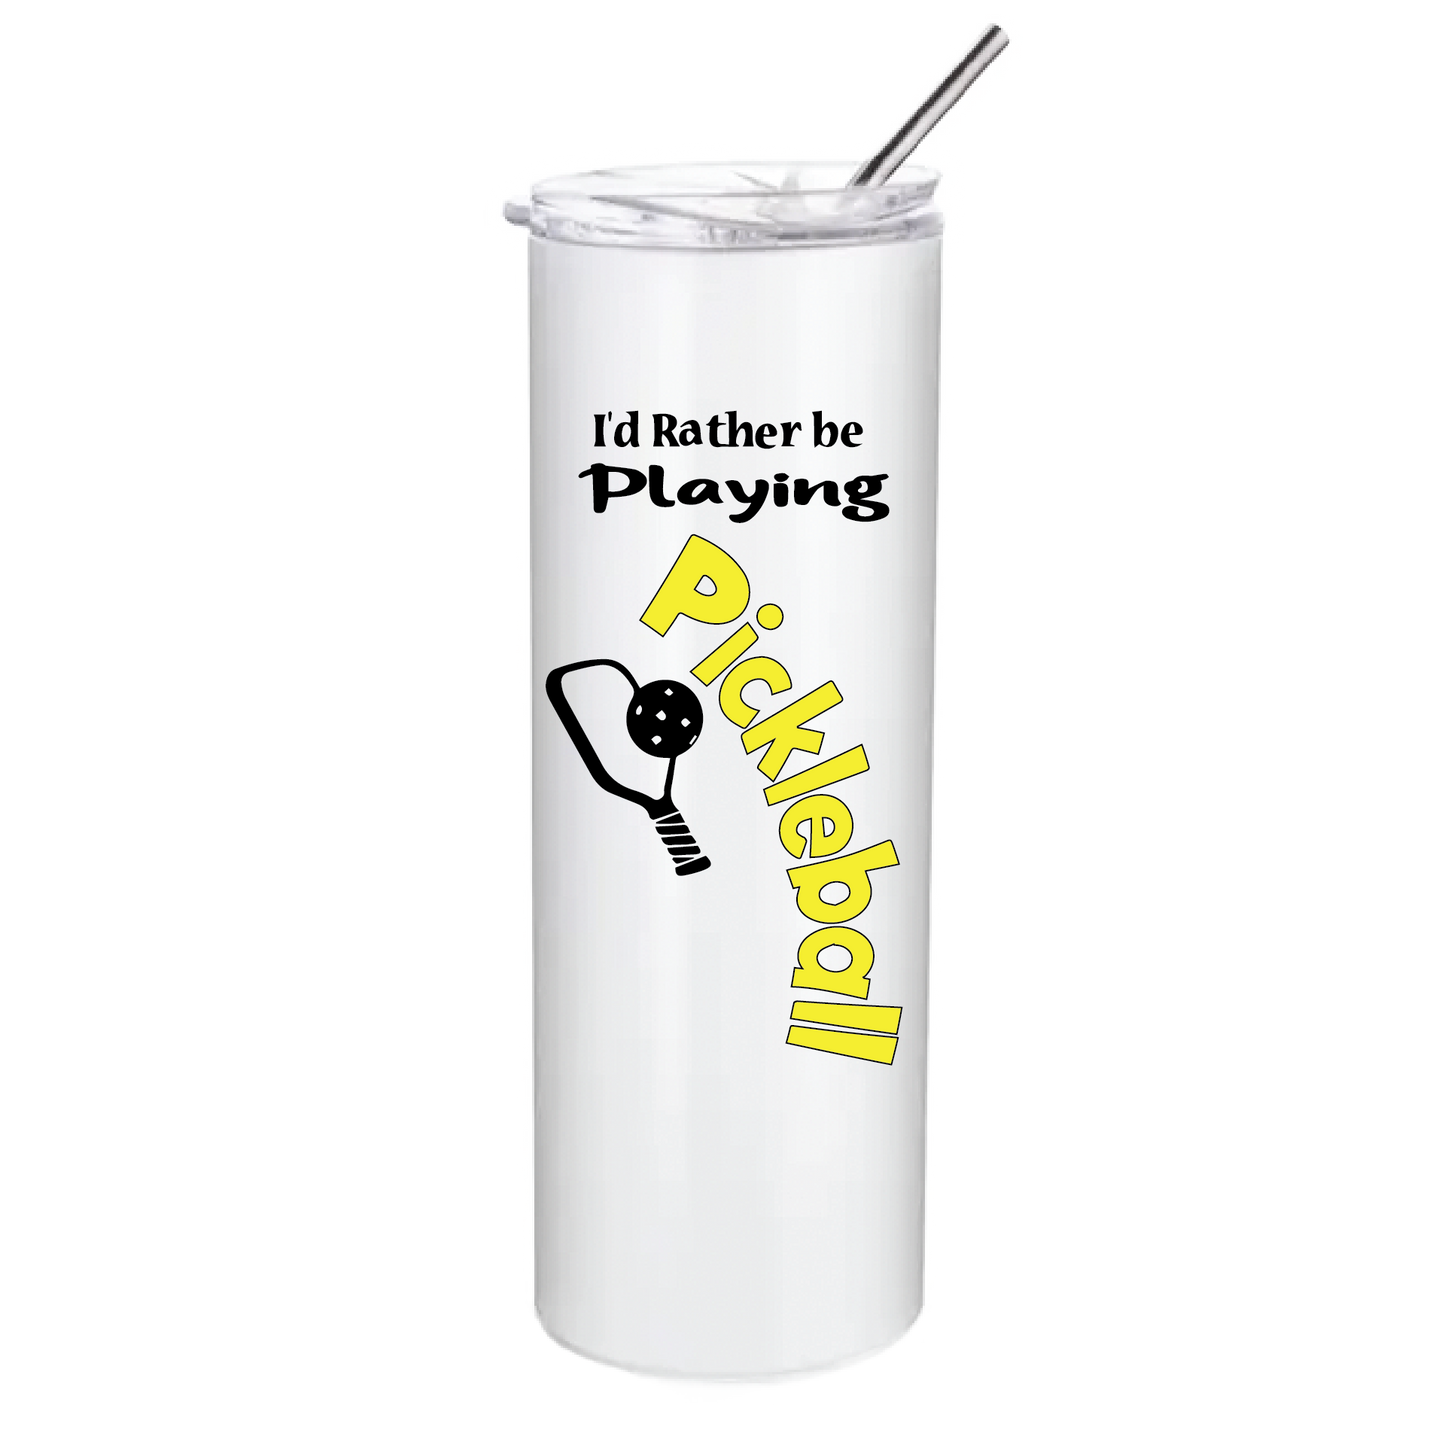 Pickleball Tumbler Design: I'd Rather Be Playing Pickleball  These stainless steel Tumblers help keep your drink cold for 24 hours while you are out on the court playing!! Also can help keep warm drinks warm for 8 hours. No BPA and a sweat-free coating. These are also PP food grade drink containers. Comes with a splash proof lid with a seal ring which makes it beautiful and durable. One-piece molding makes it crack free for long time durability.